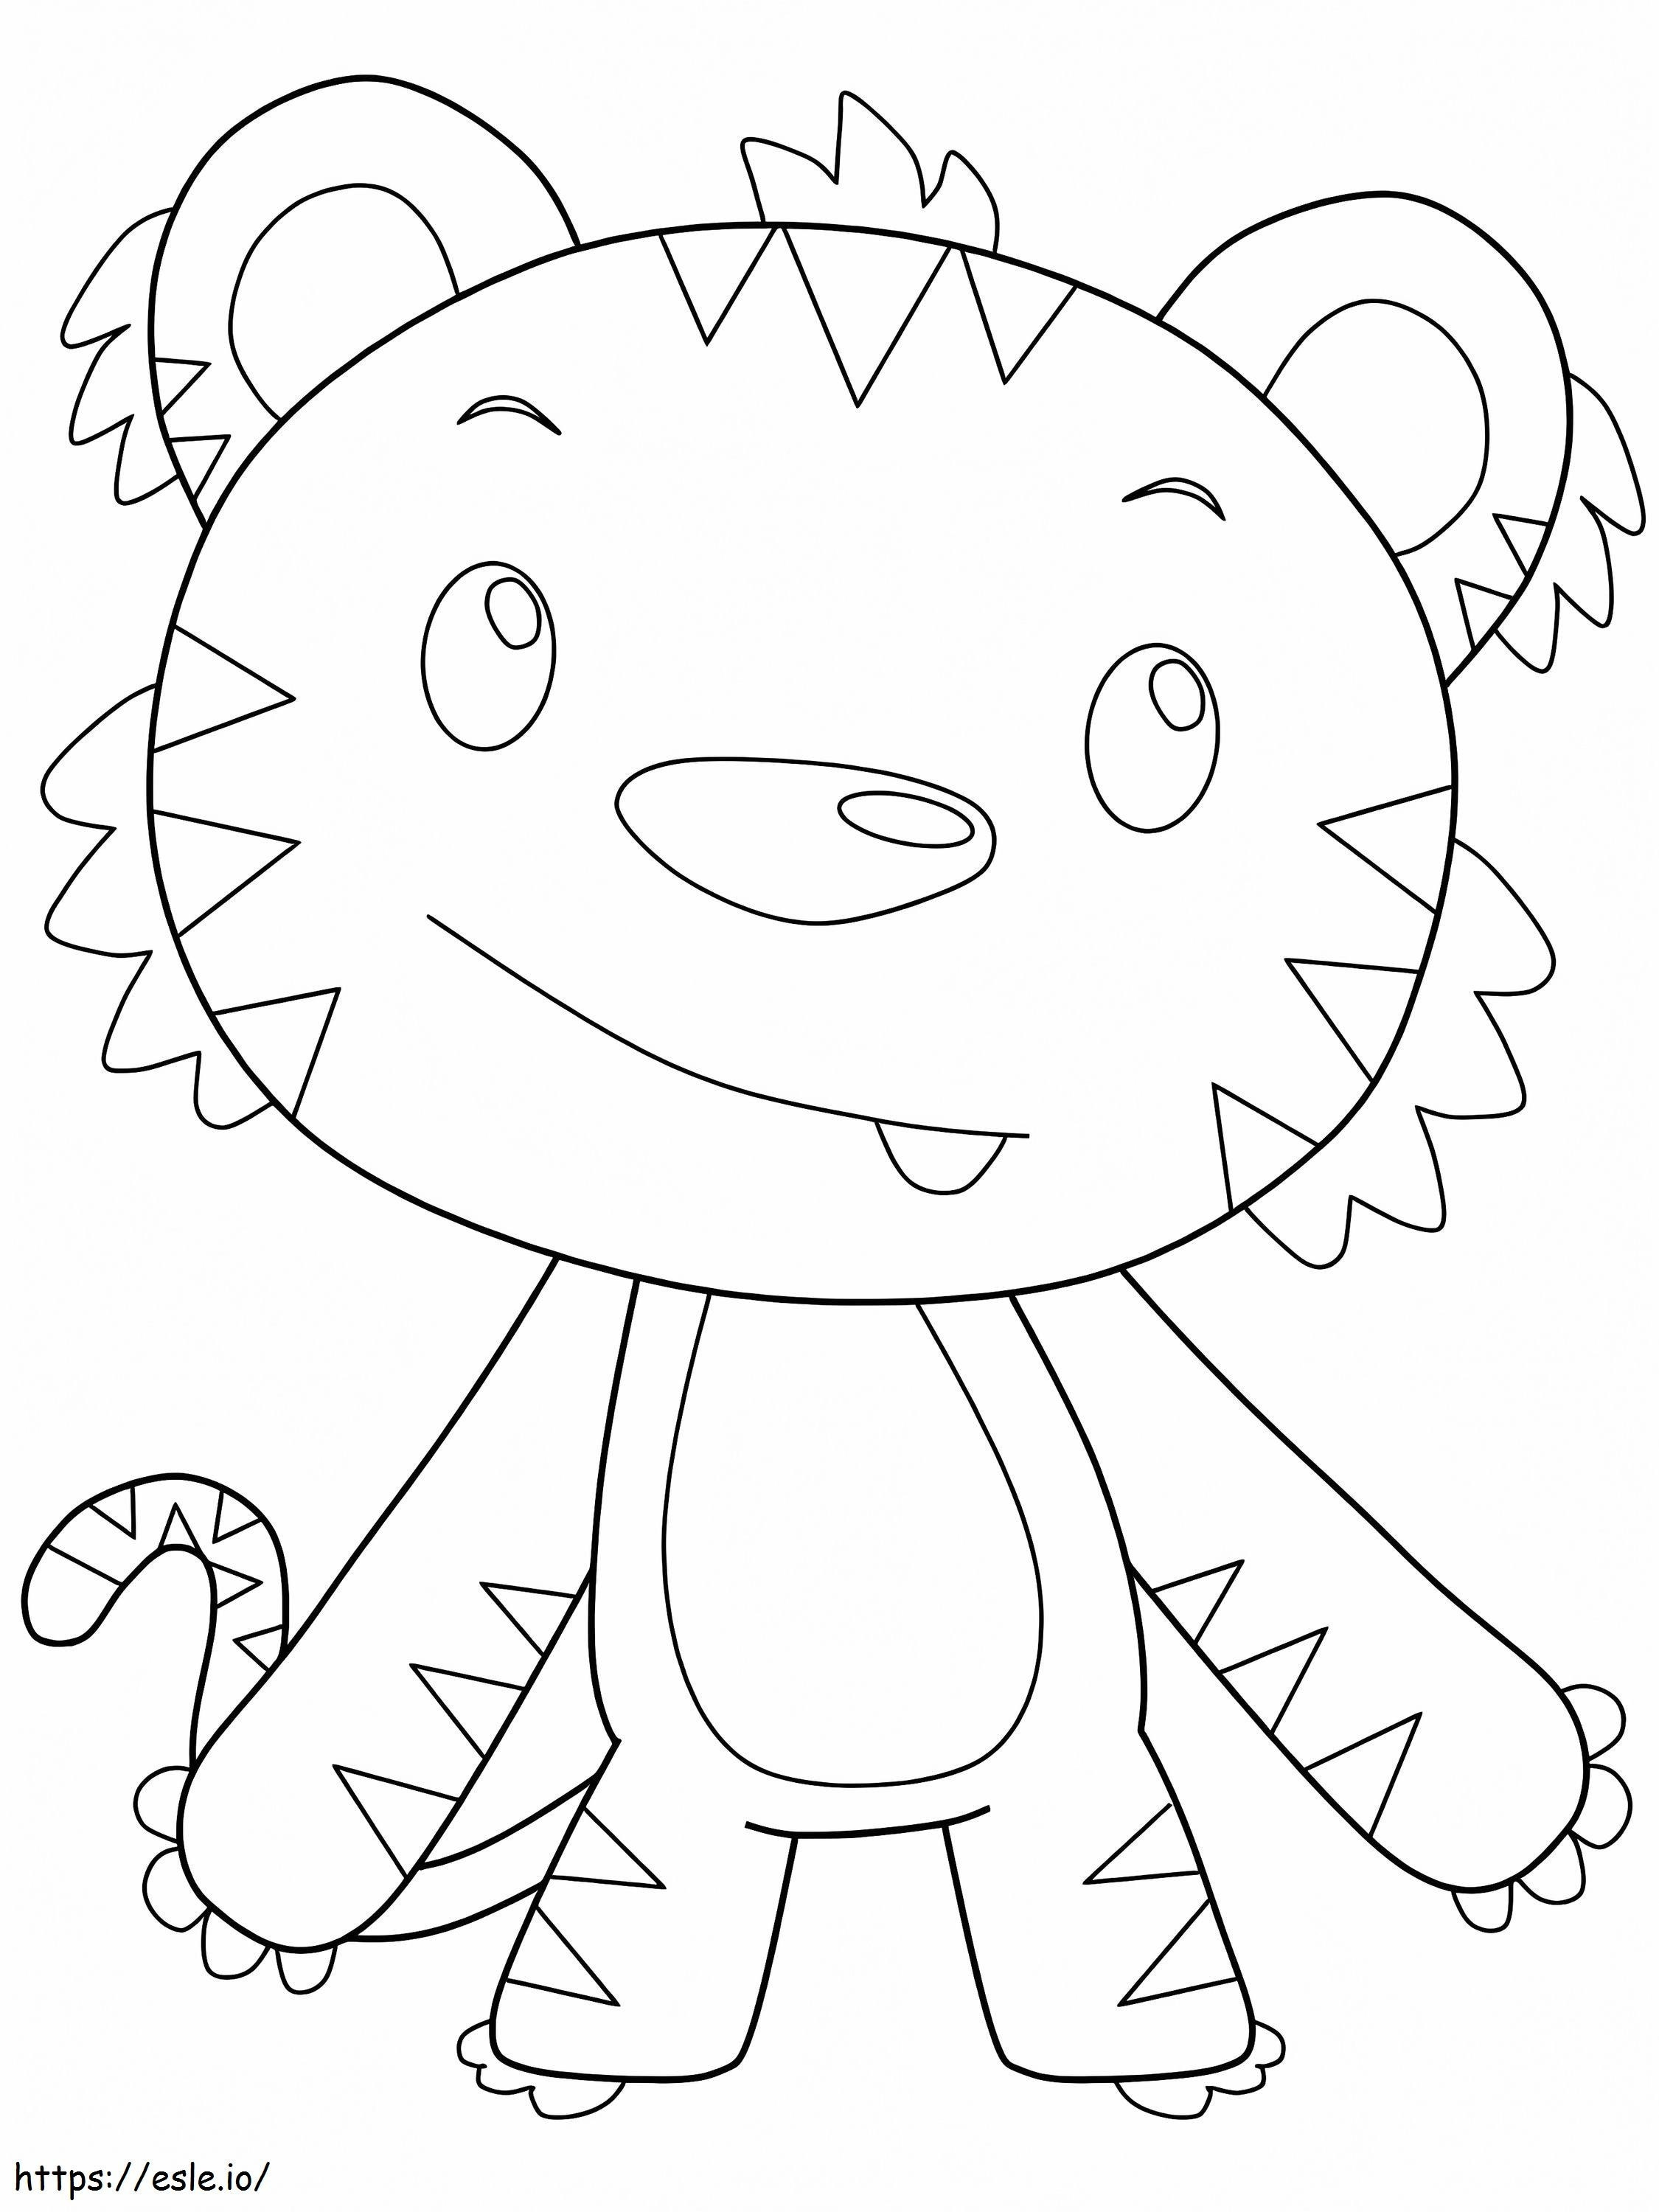 Tiger For Kids coloring page